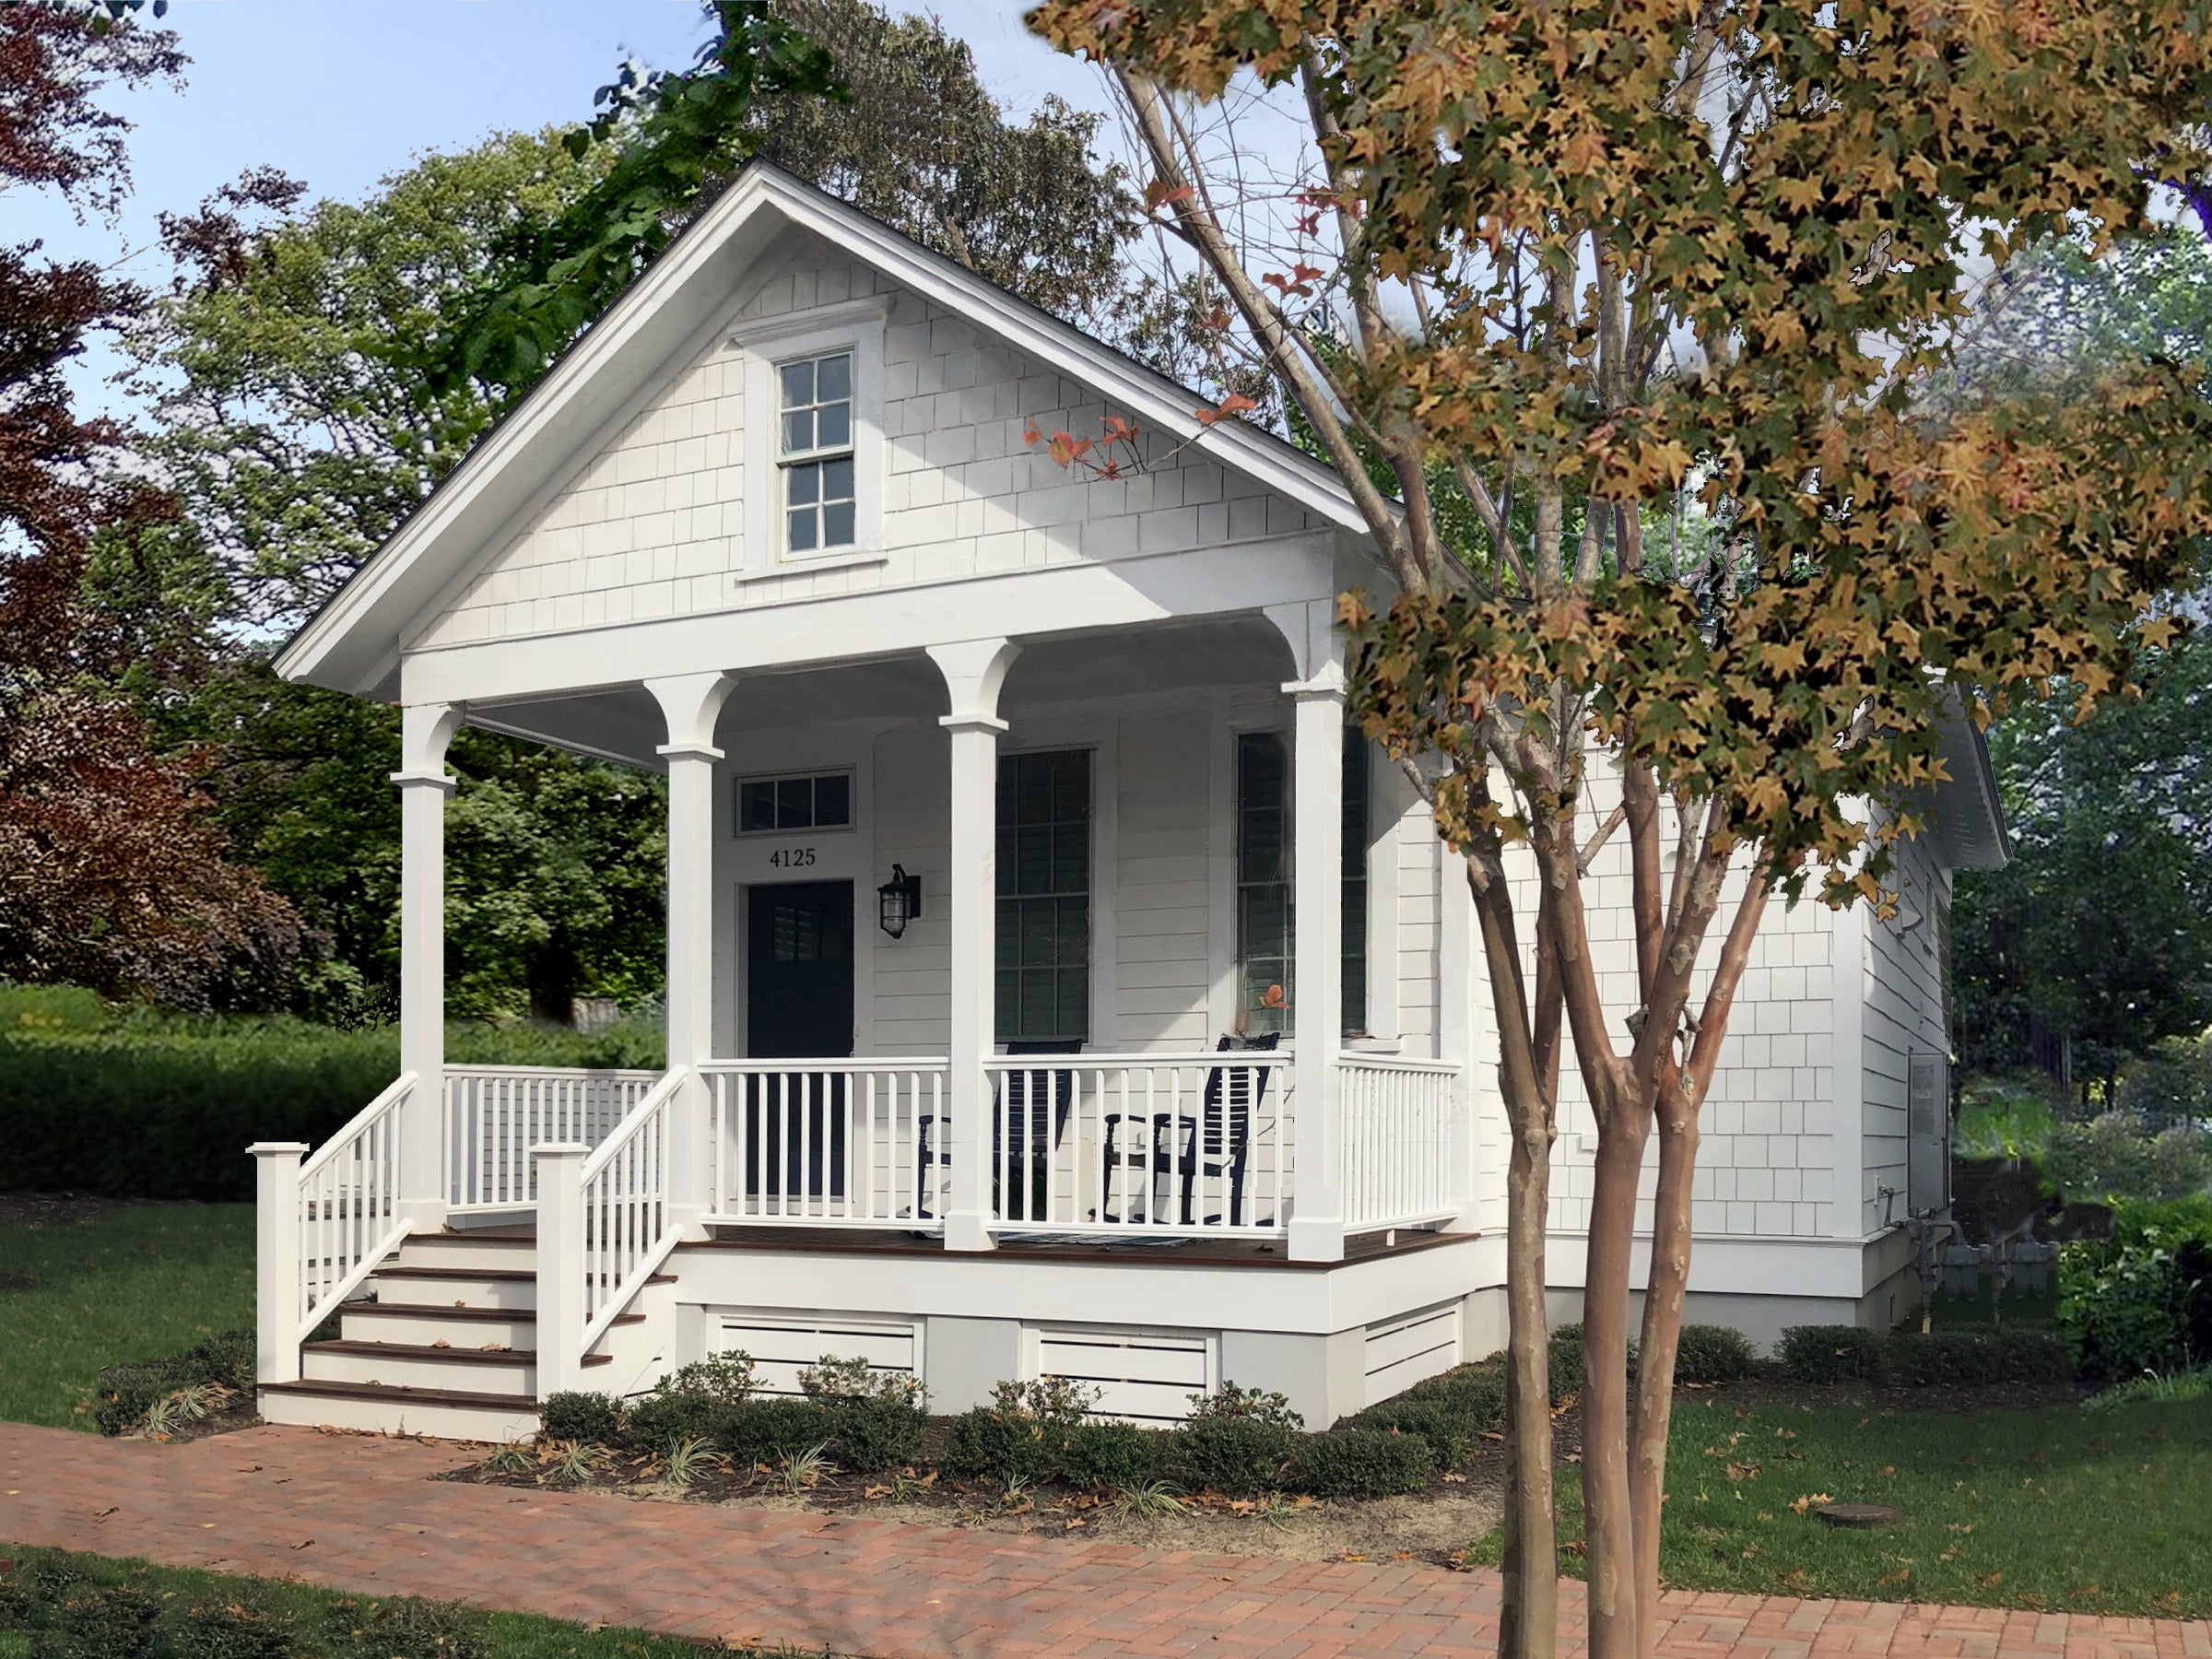 Photo of the Poplar Cove by Jeremy Sommer, a white cottage with a pedimented, three-bay front porch with rocking chair. Surrounded by early autumn landscape.